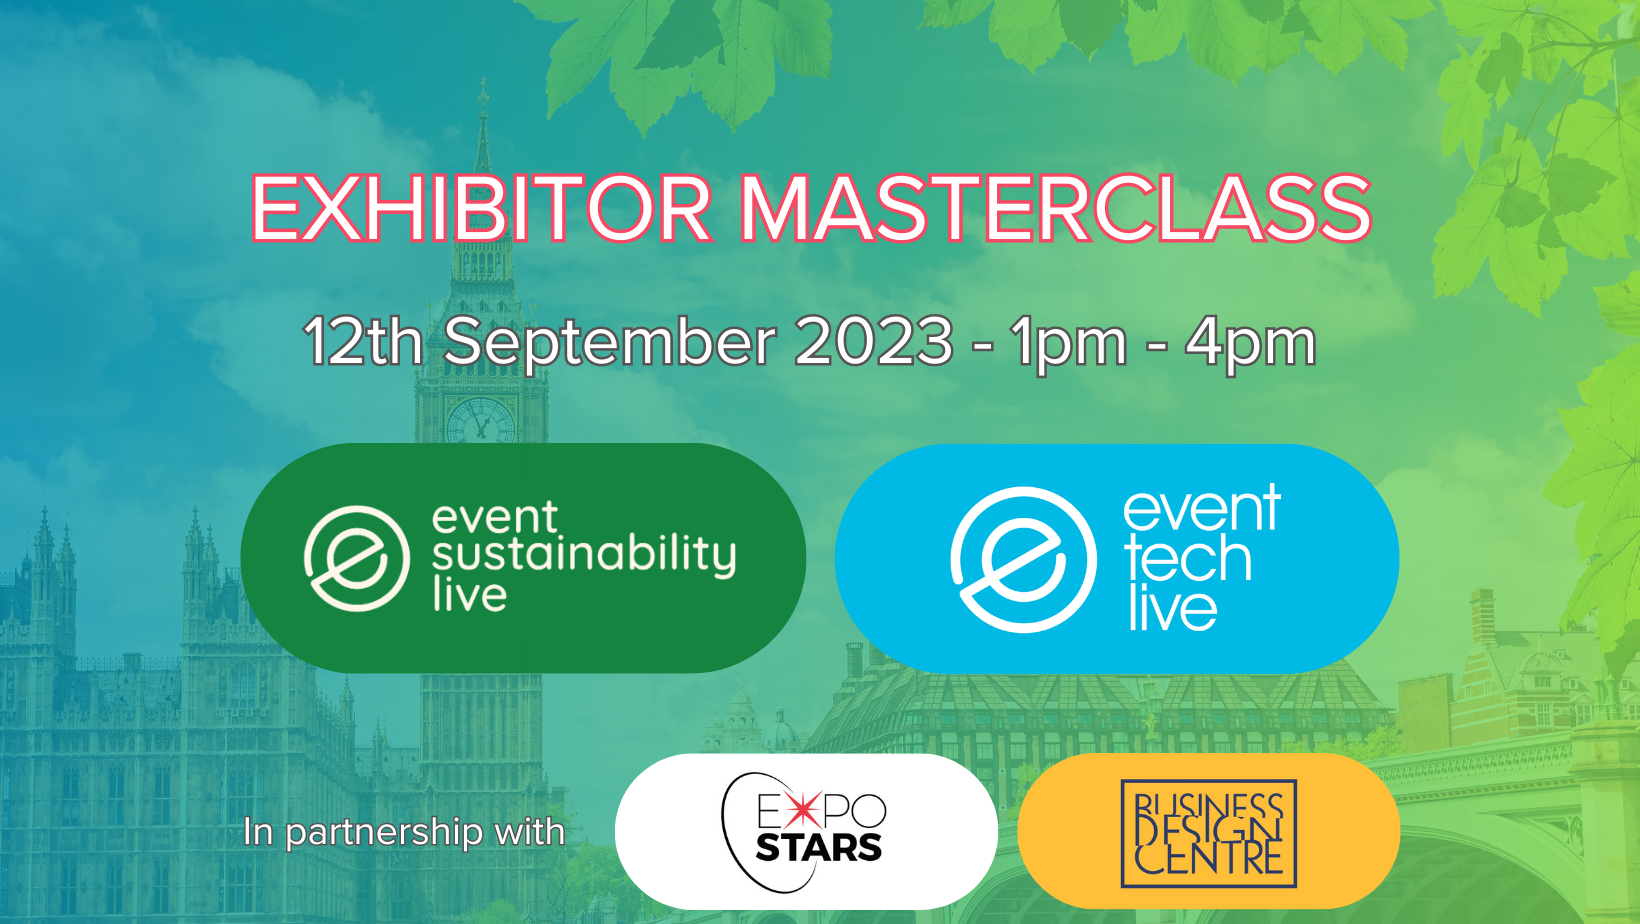 Expo Stars to deliver Event Tech Live and Event Sustainability Live exhibitor masterclass